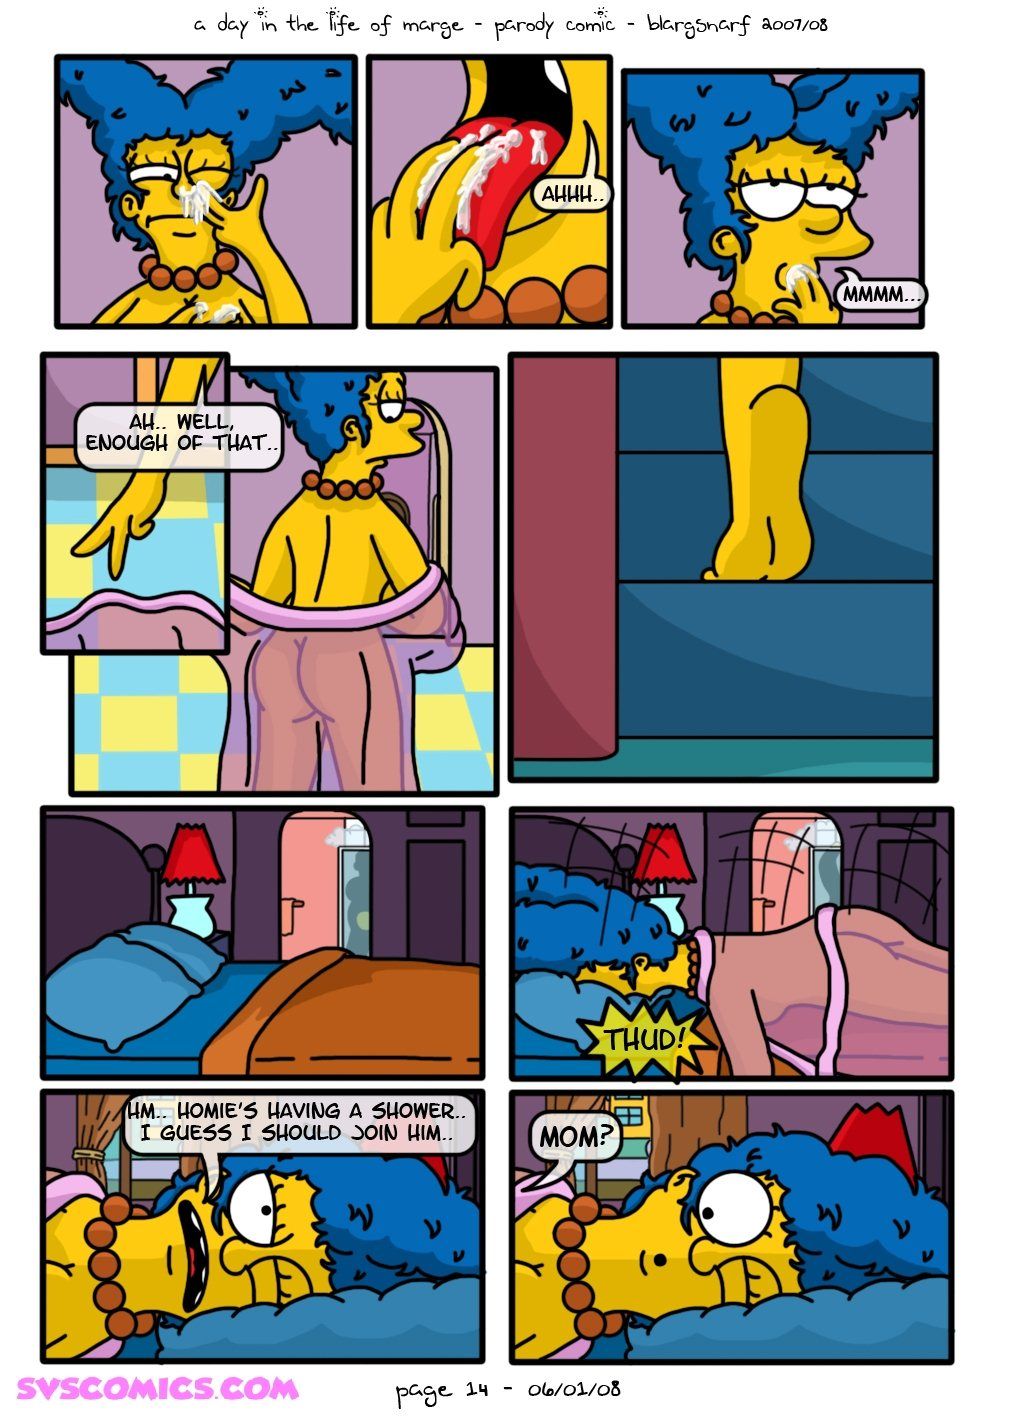 [Blargsnarf] A Day Life of Marge (The Simpsons) page 15